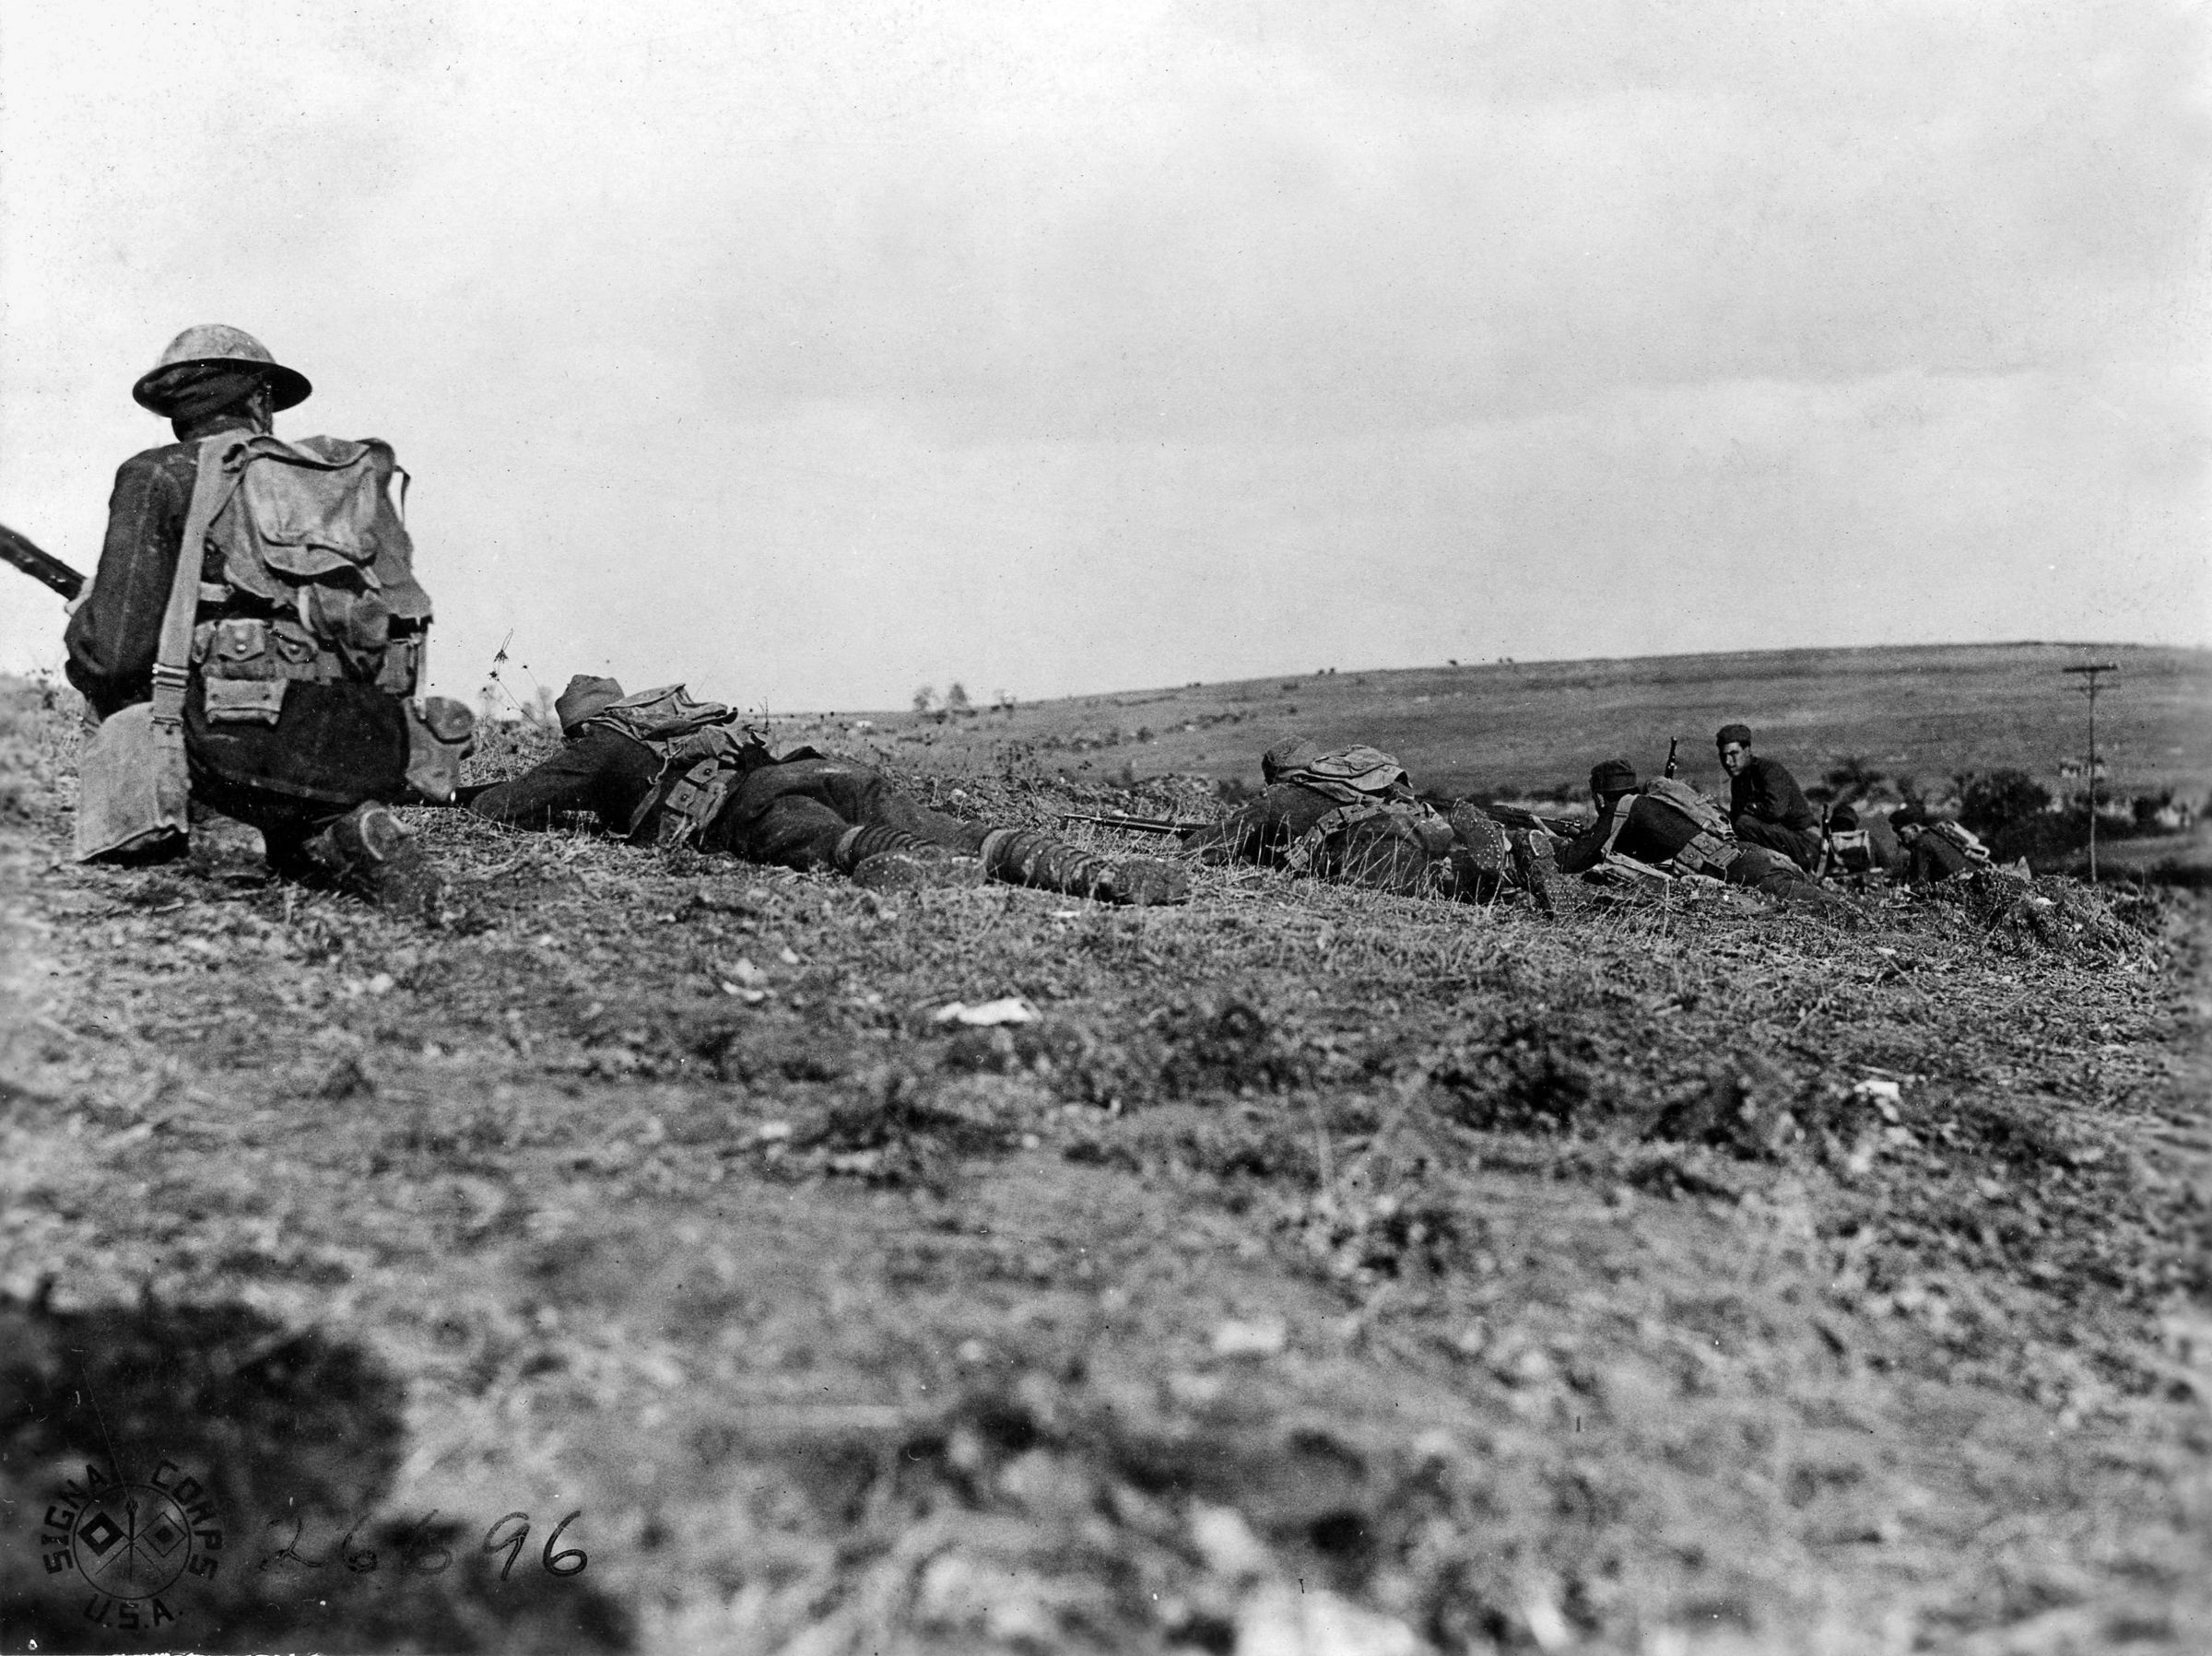 Troops of the 64th Infantry Brigade, 32nd Division, advance in support of the first line near Romagne-Sous-Montfaucon, France, in November 1918. The end of the war is near.